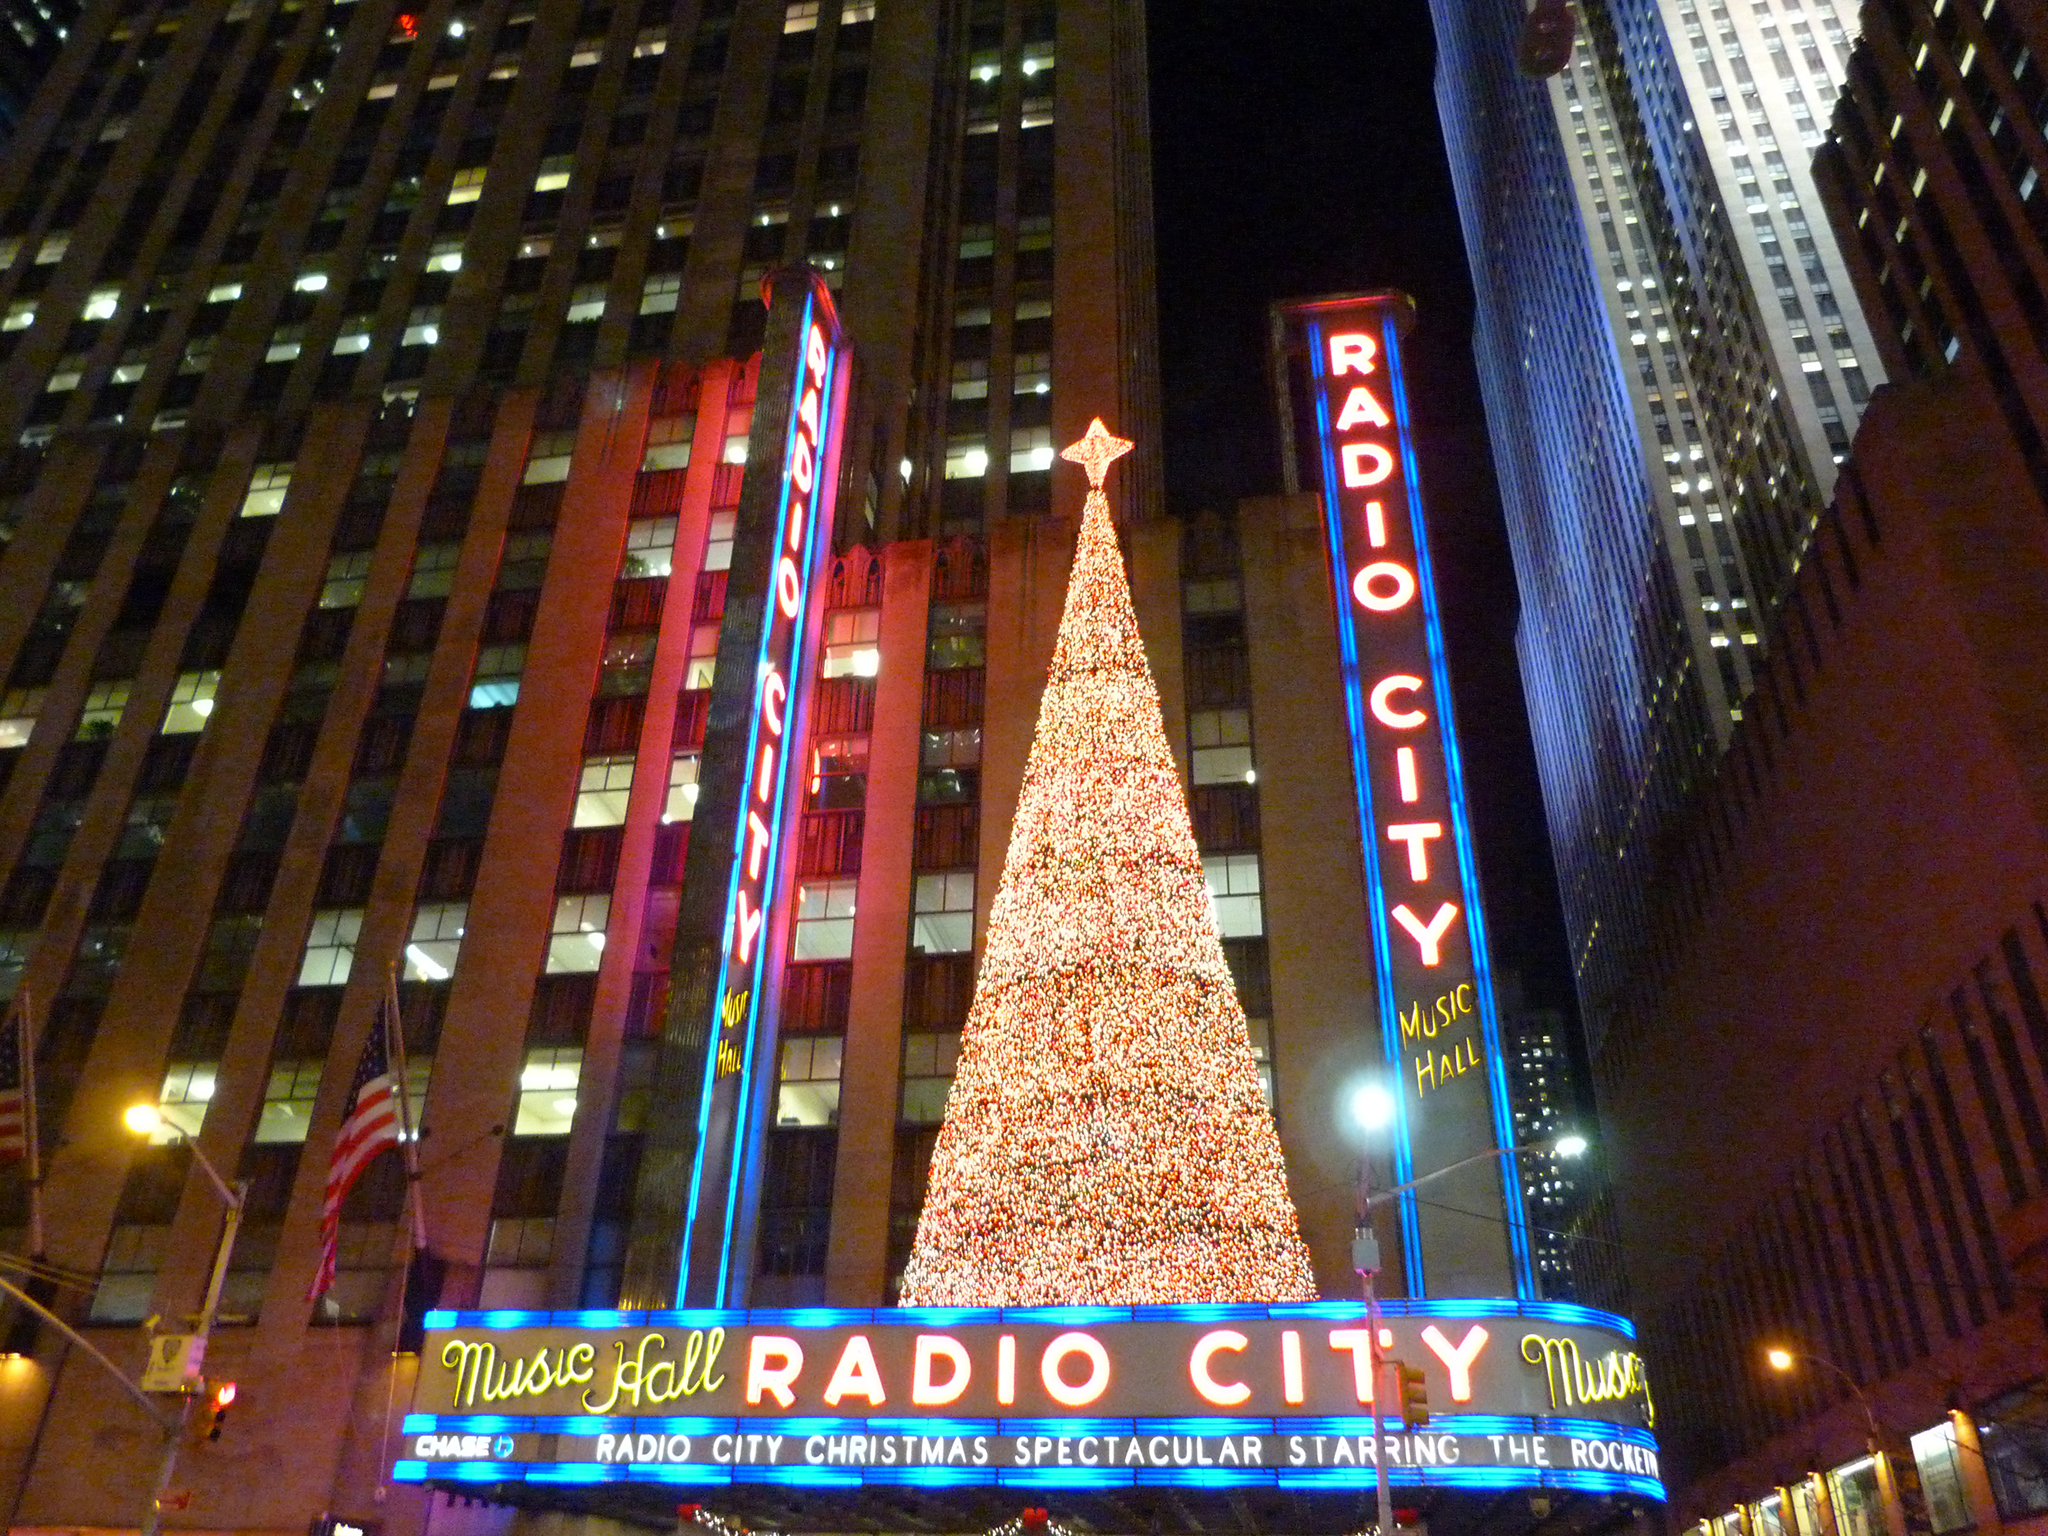 Best Christmas lights NYC has to offer plus festive attractions